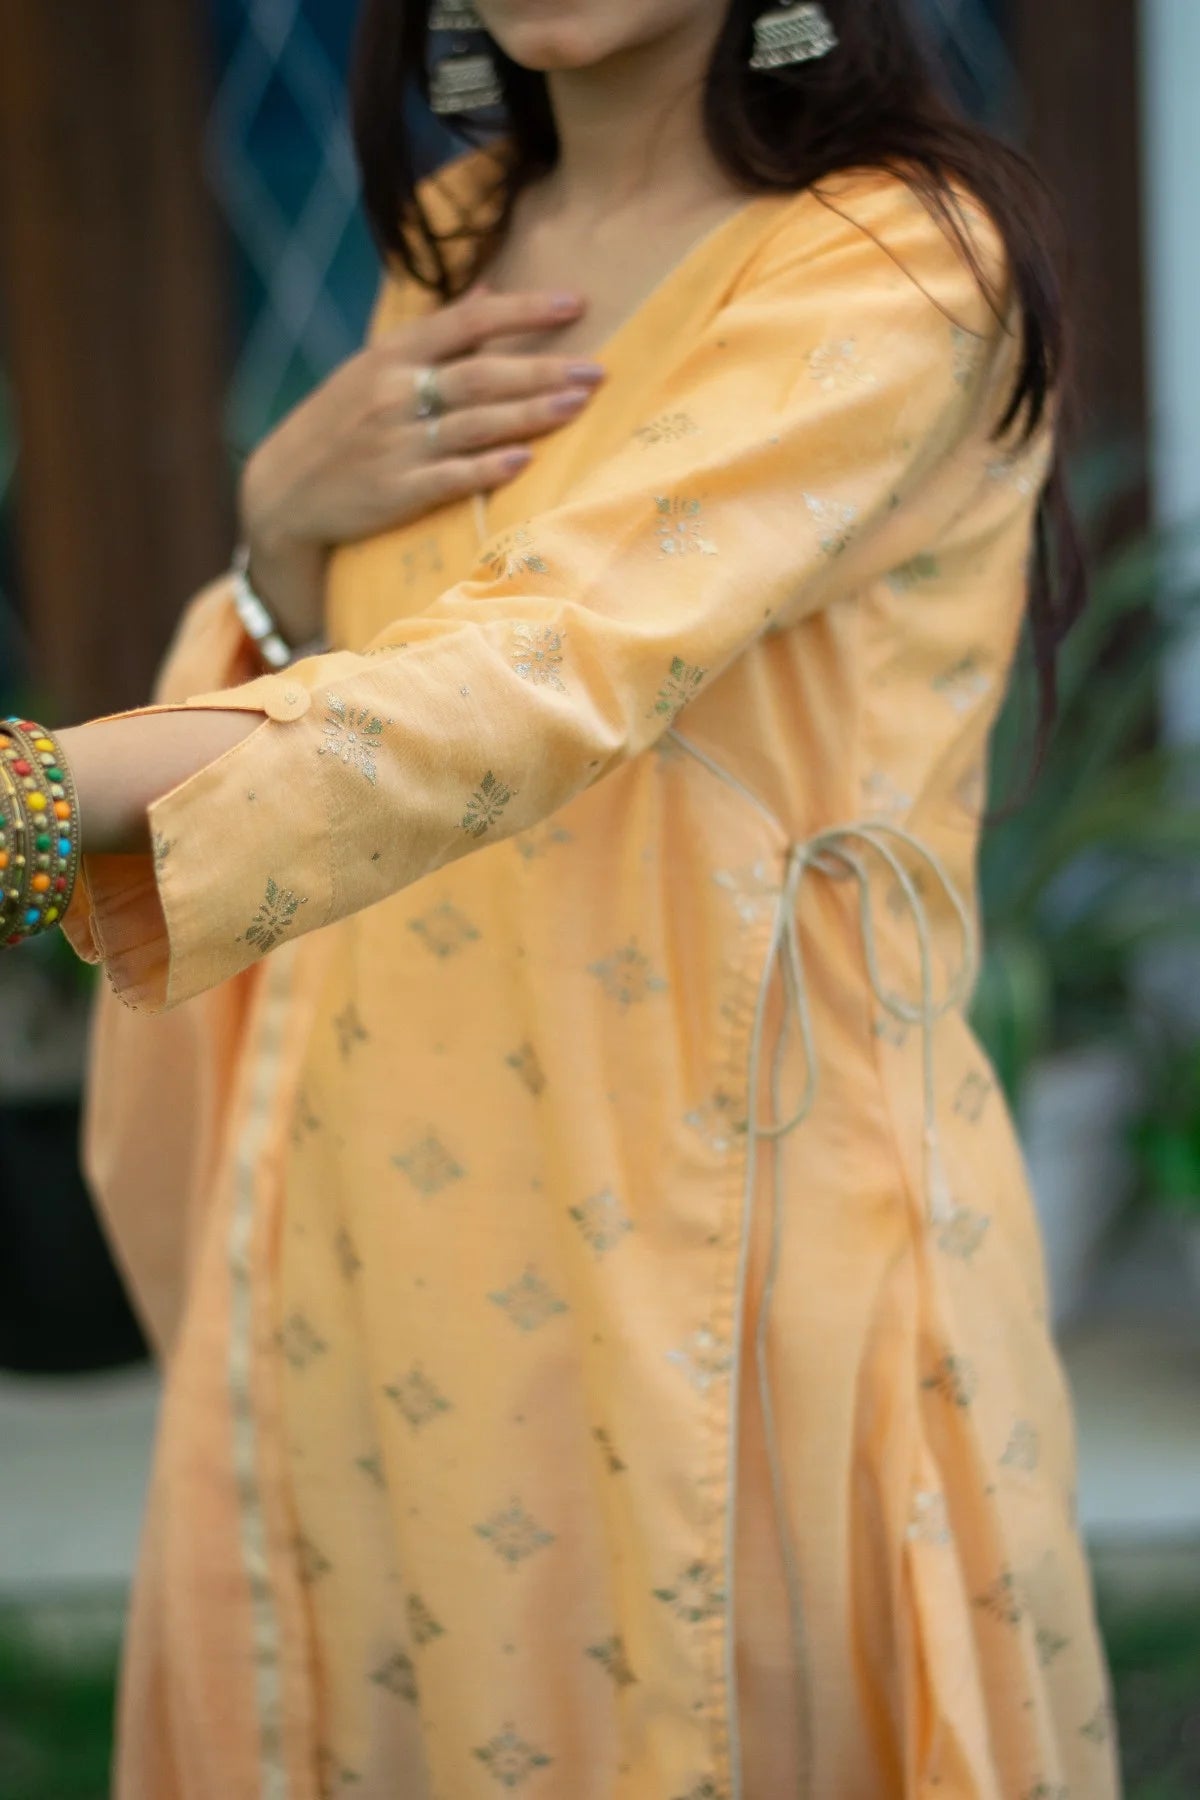 An Indian woman looks stunning in her peach angarkha kurta, featuring delicate gold embellishments.